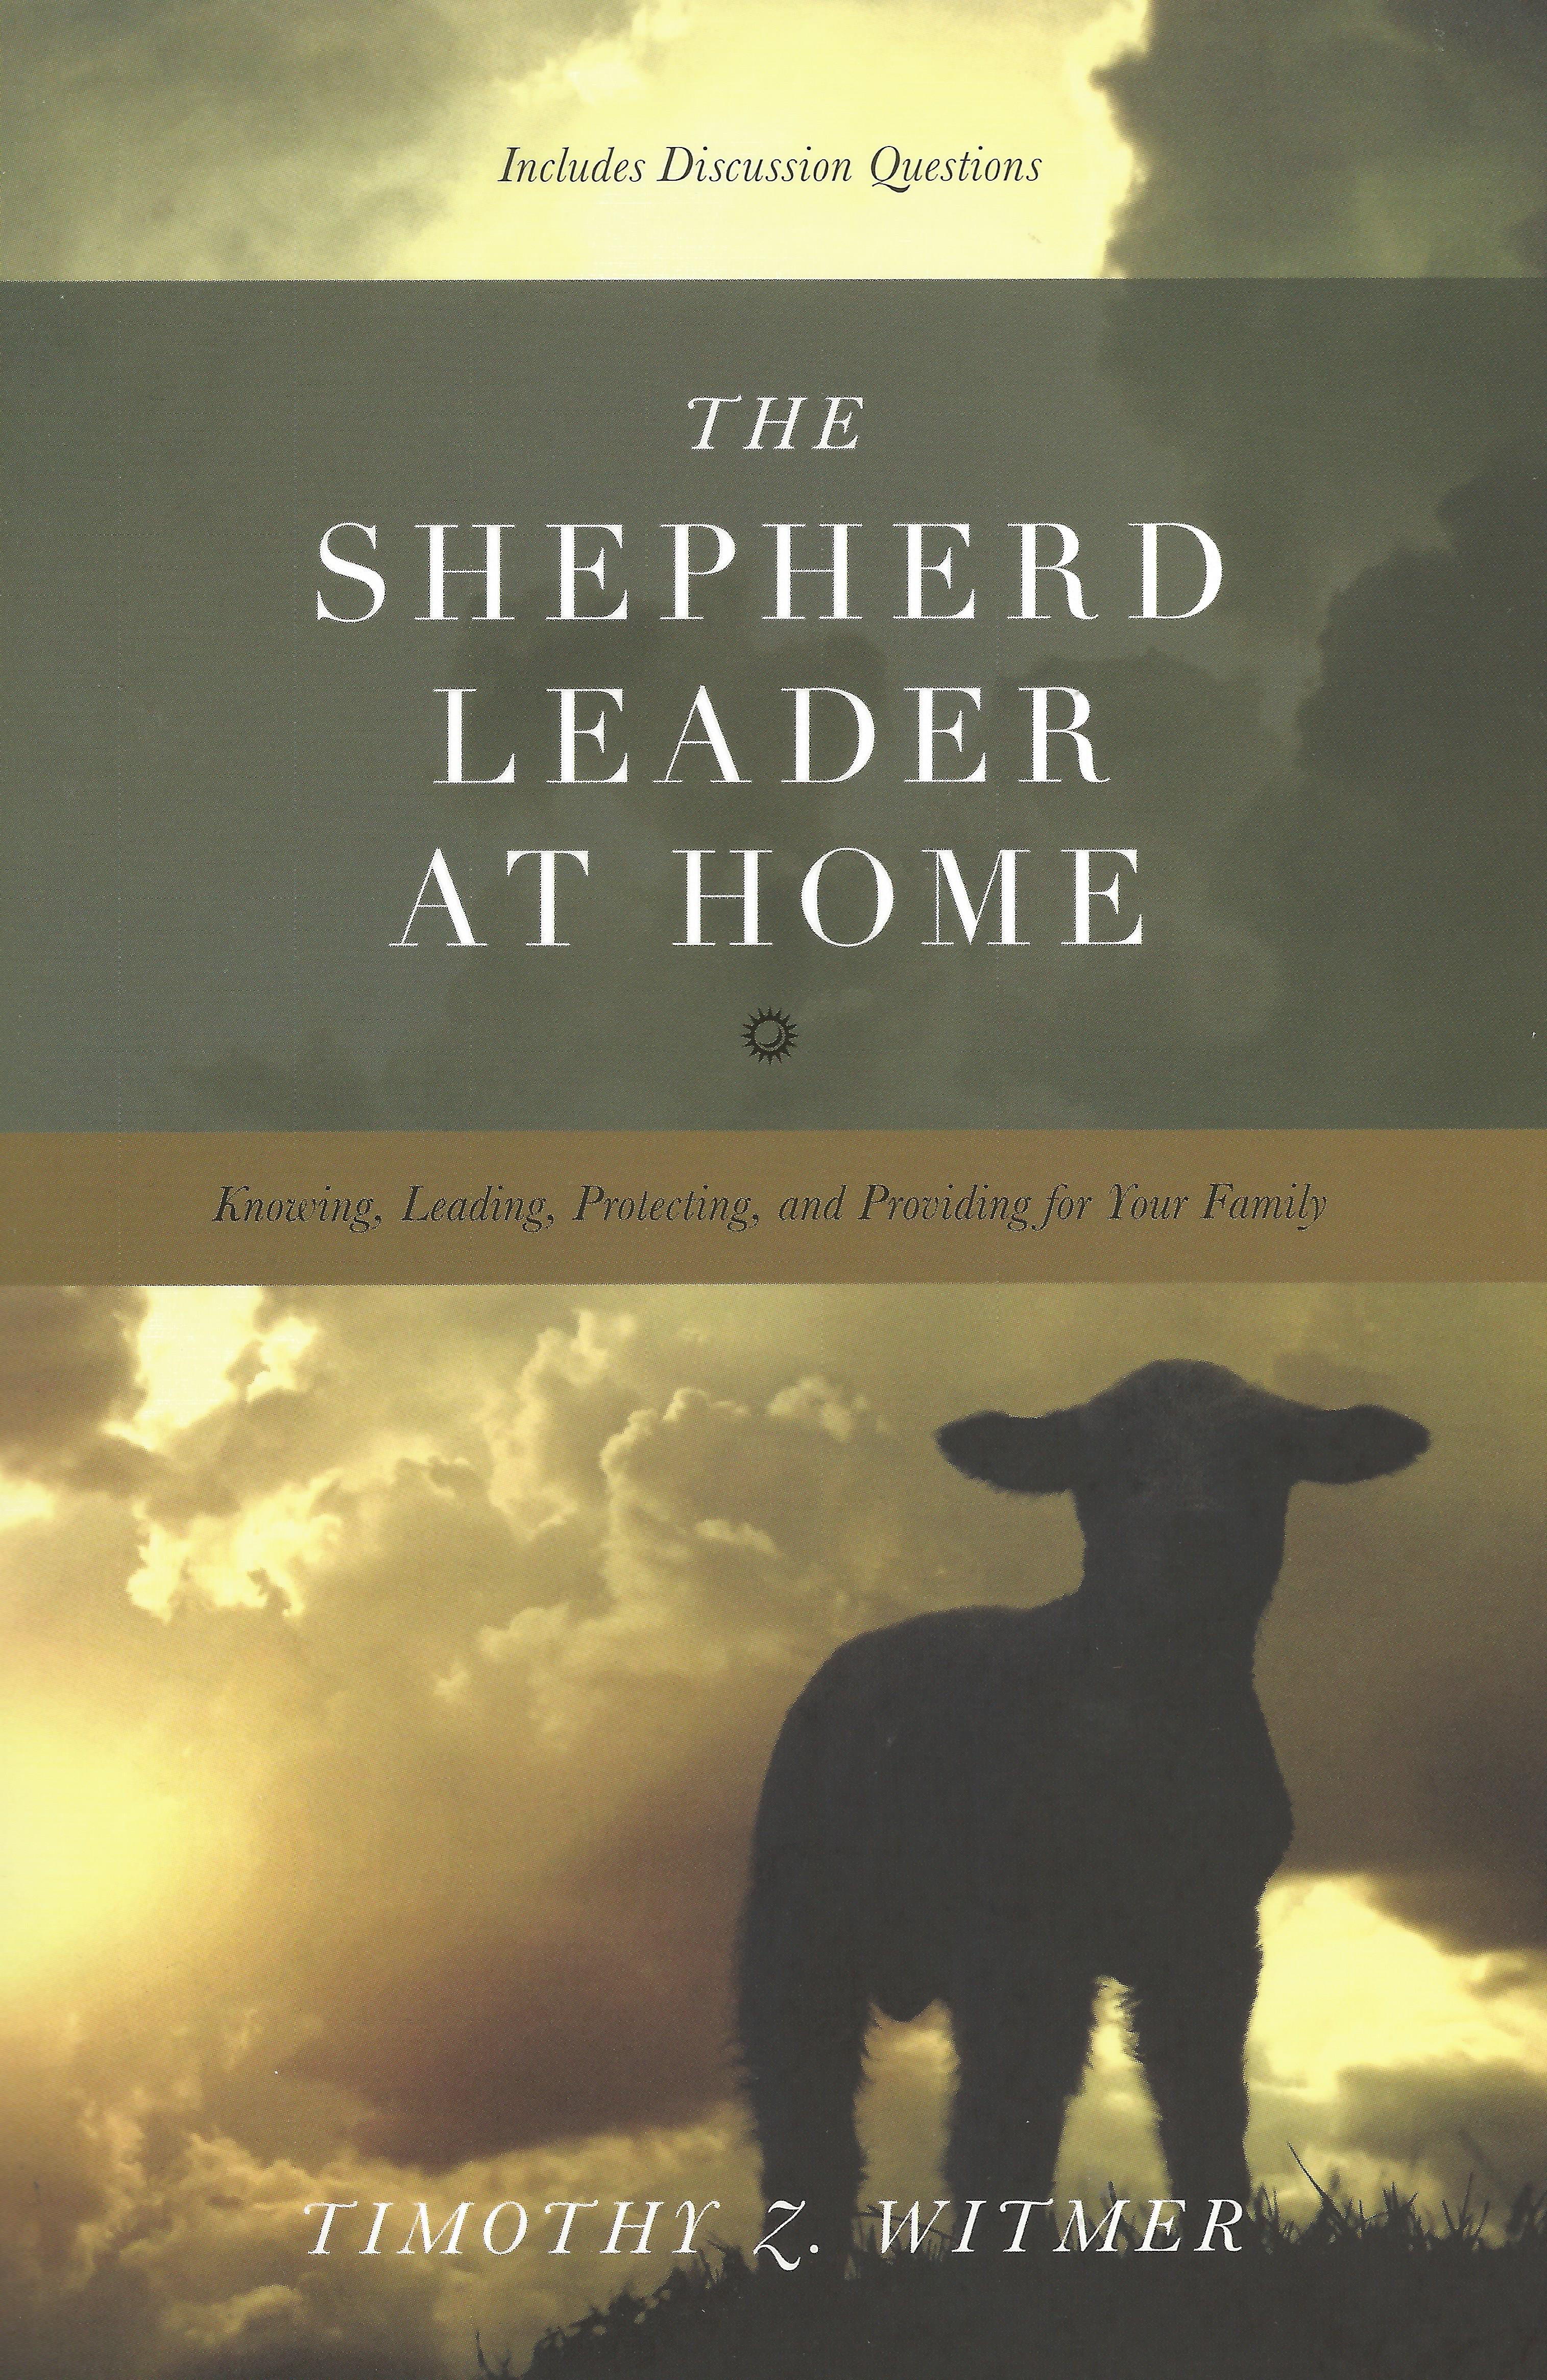 THE SHEPHERD LEADER AT HOME TIMOTHY WITMER - Click Image to Close